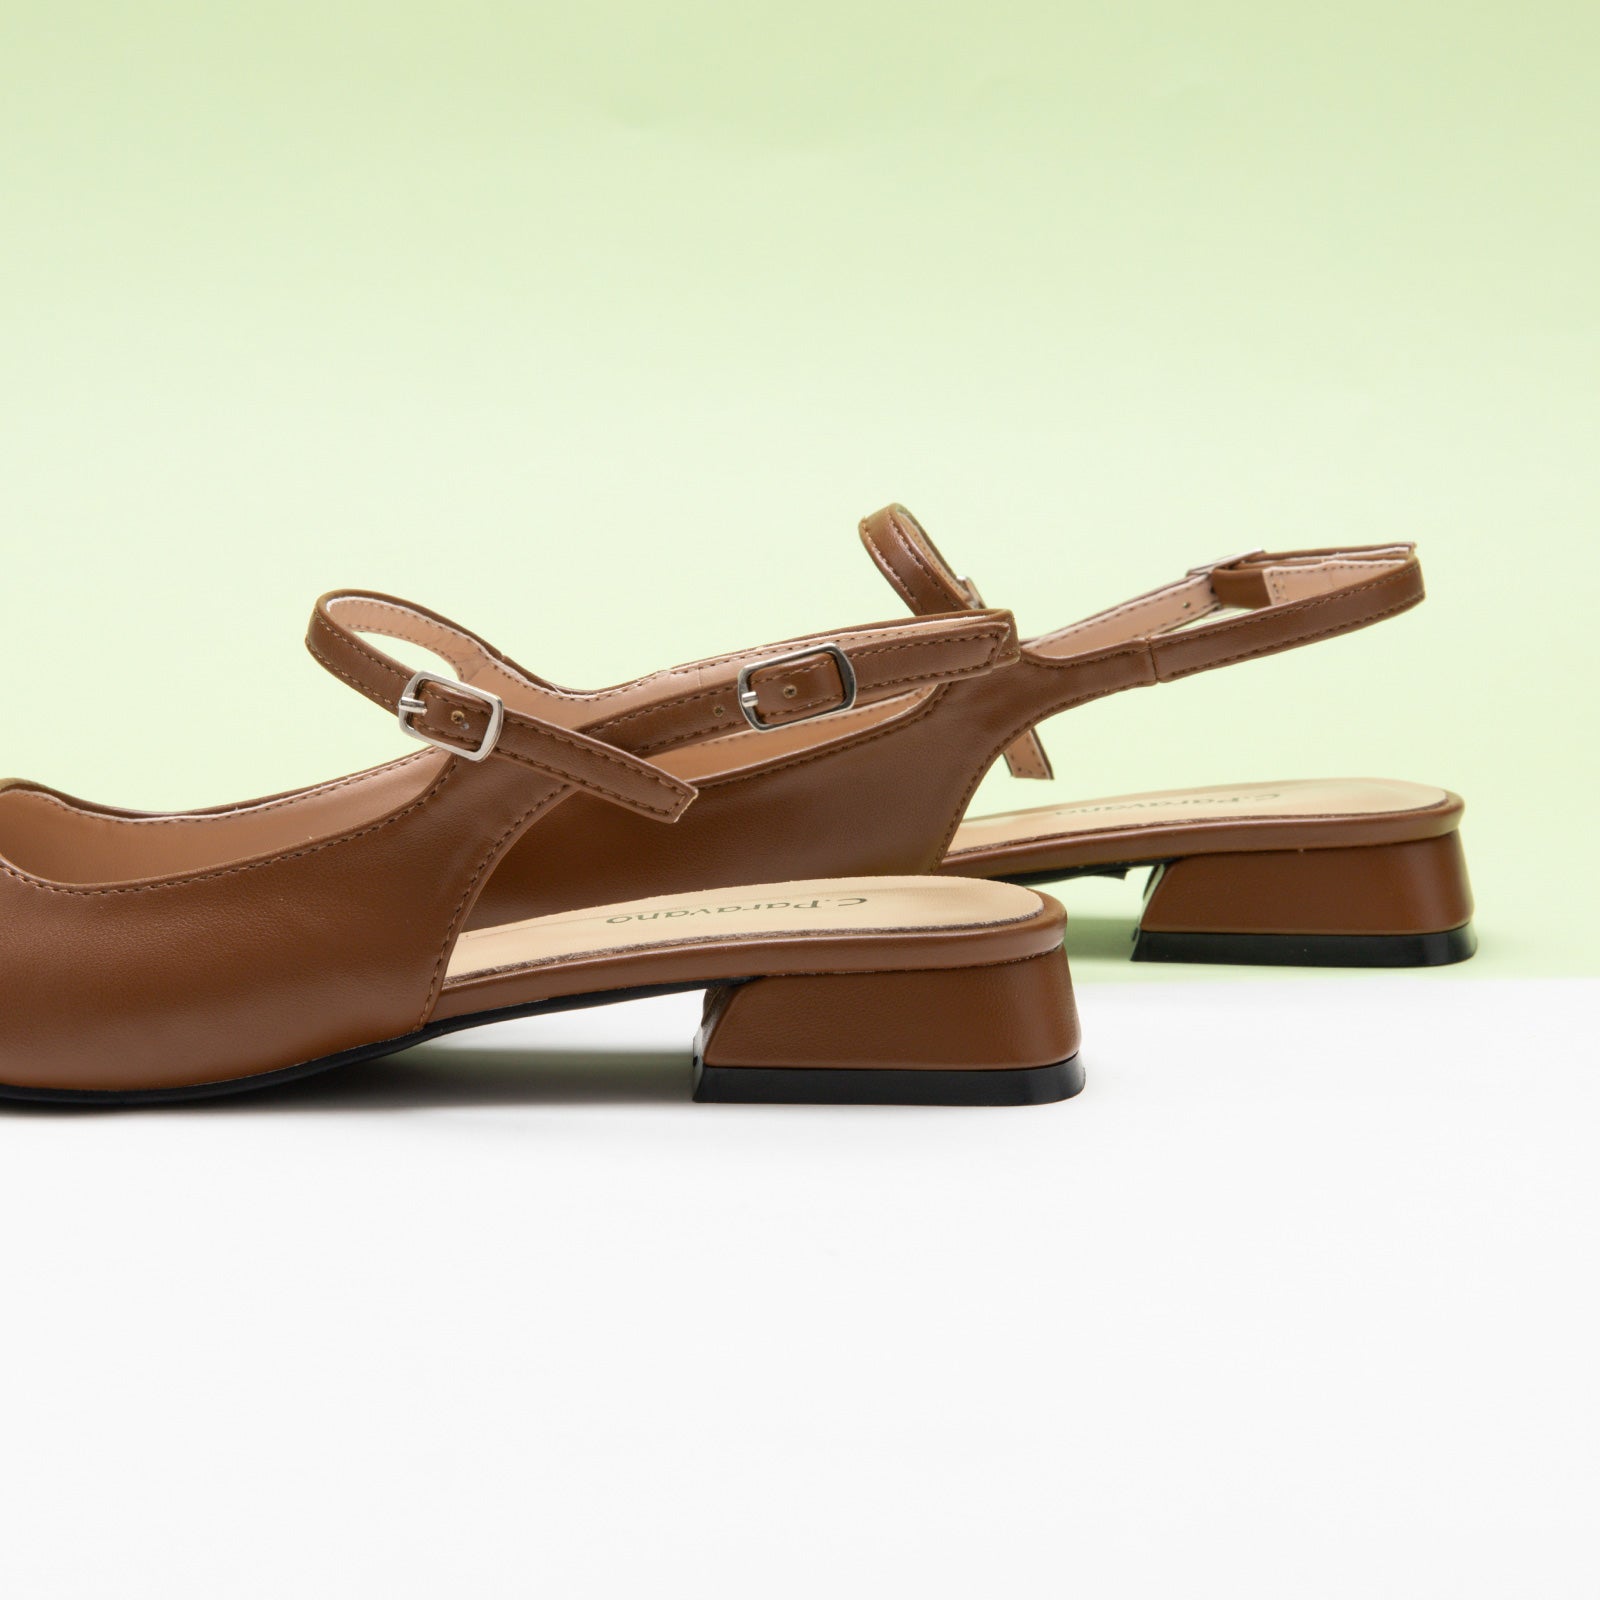 Brown Squared Toe Slingback Flats, perfect for a confident and fashionable look in any urban setting.